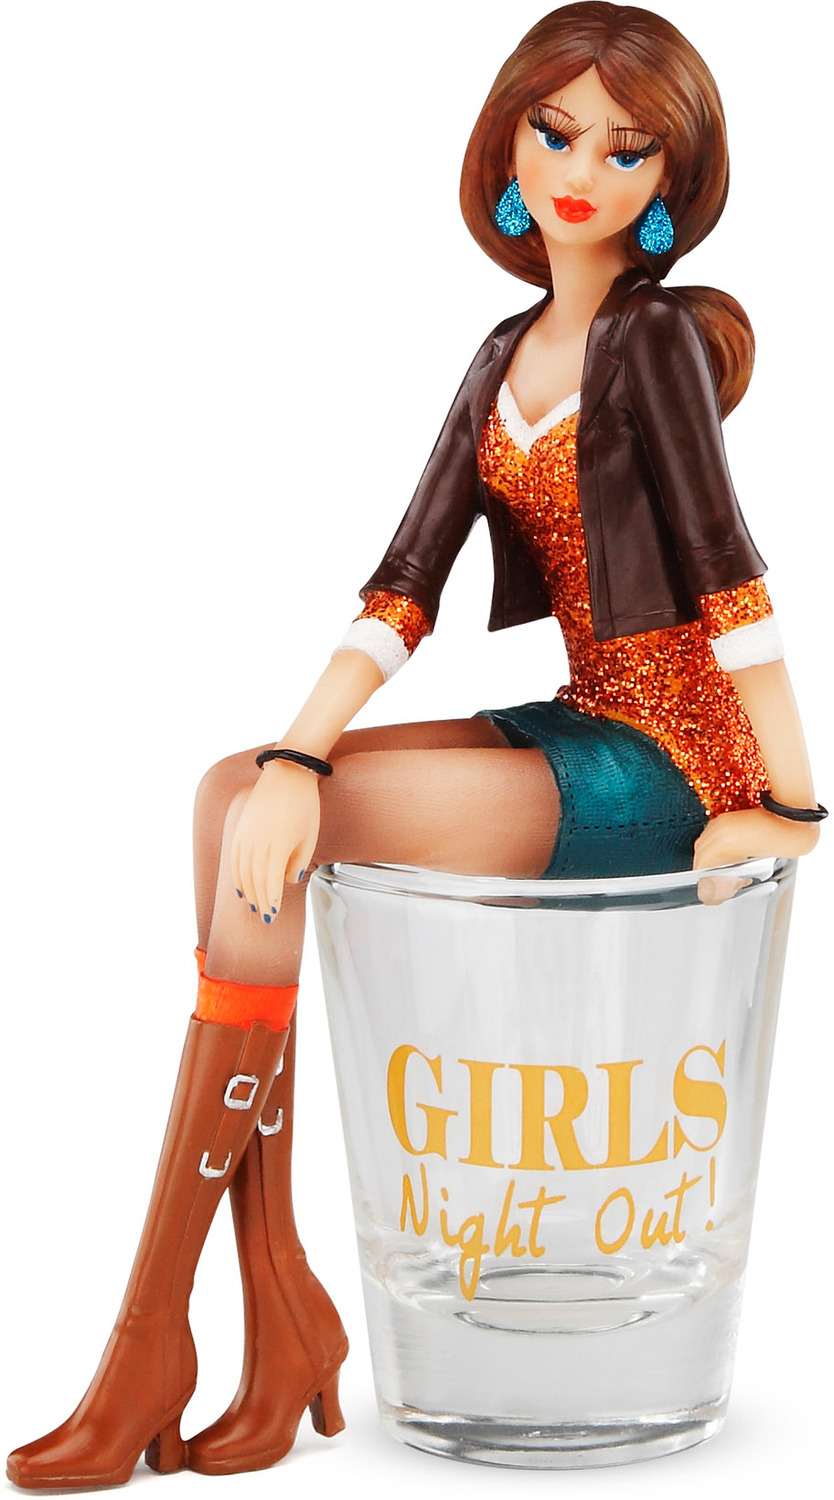 Girls Night Out by Hiccup - Girls Night Out - 5.25" Girl in Shot Glass